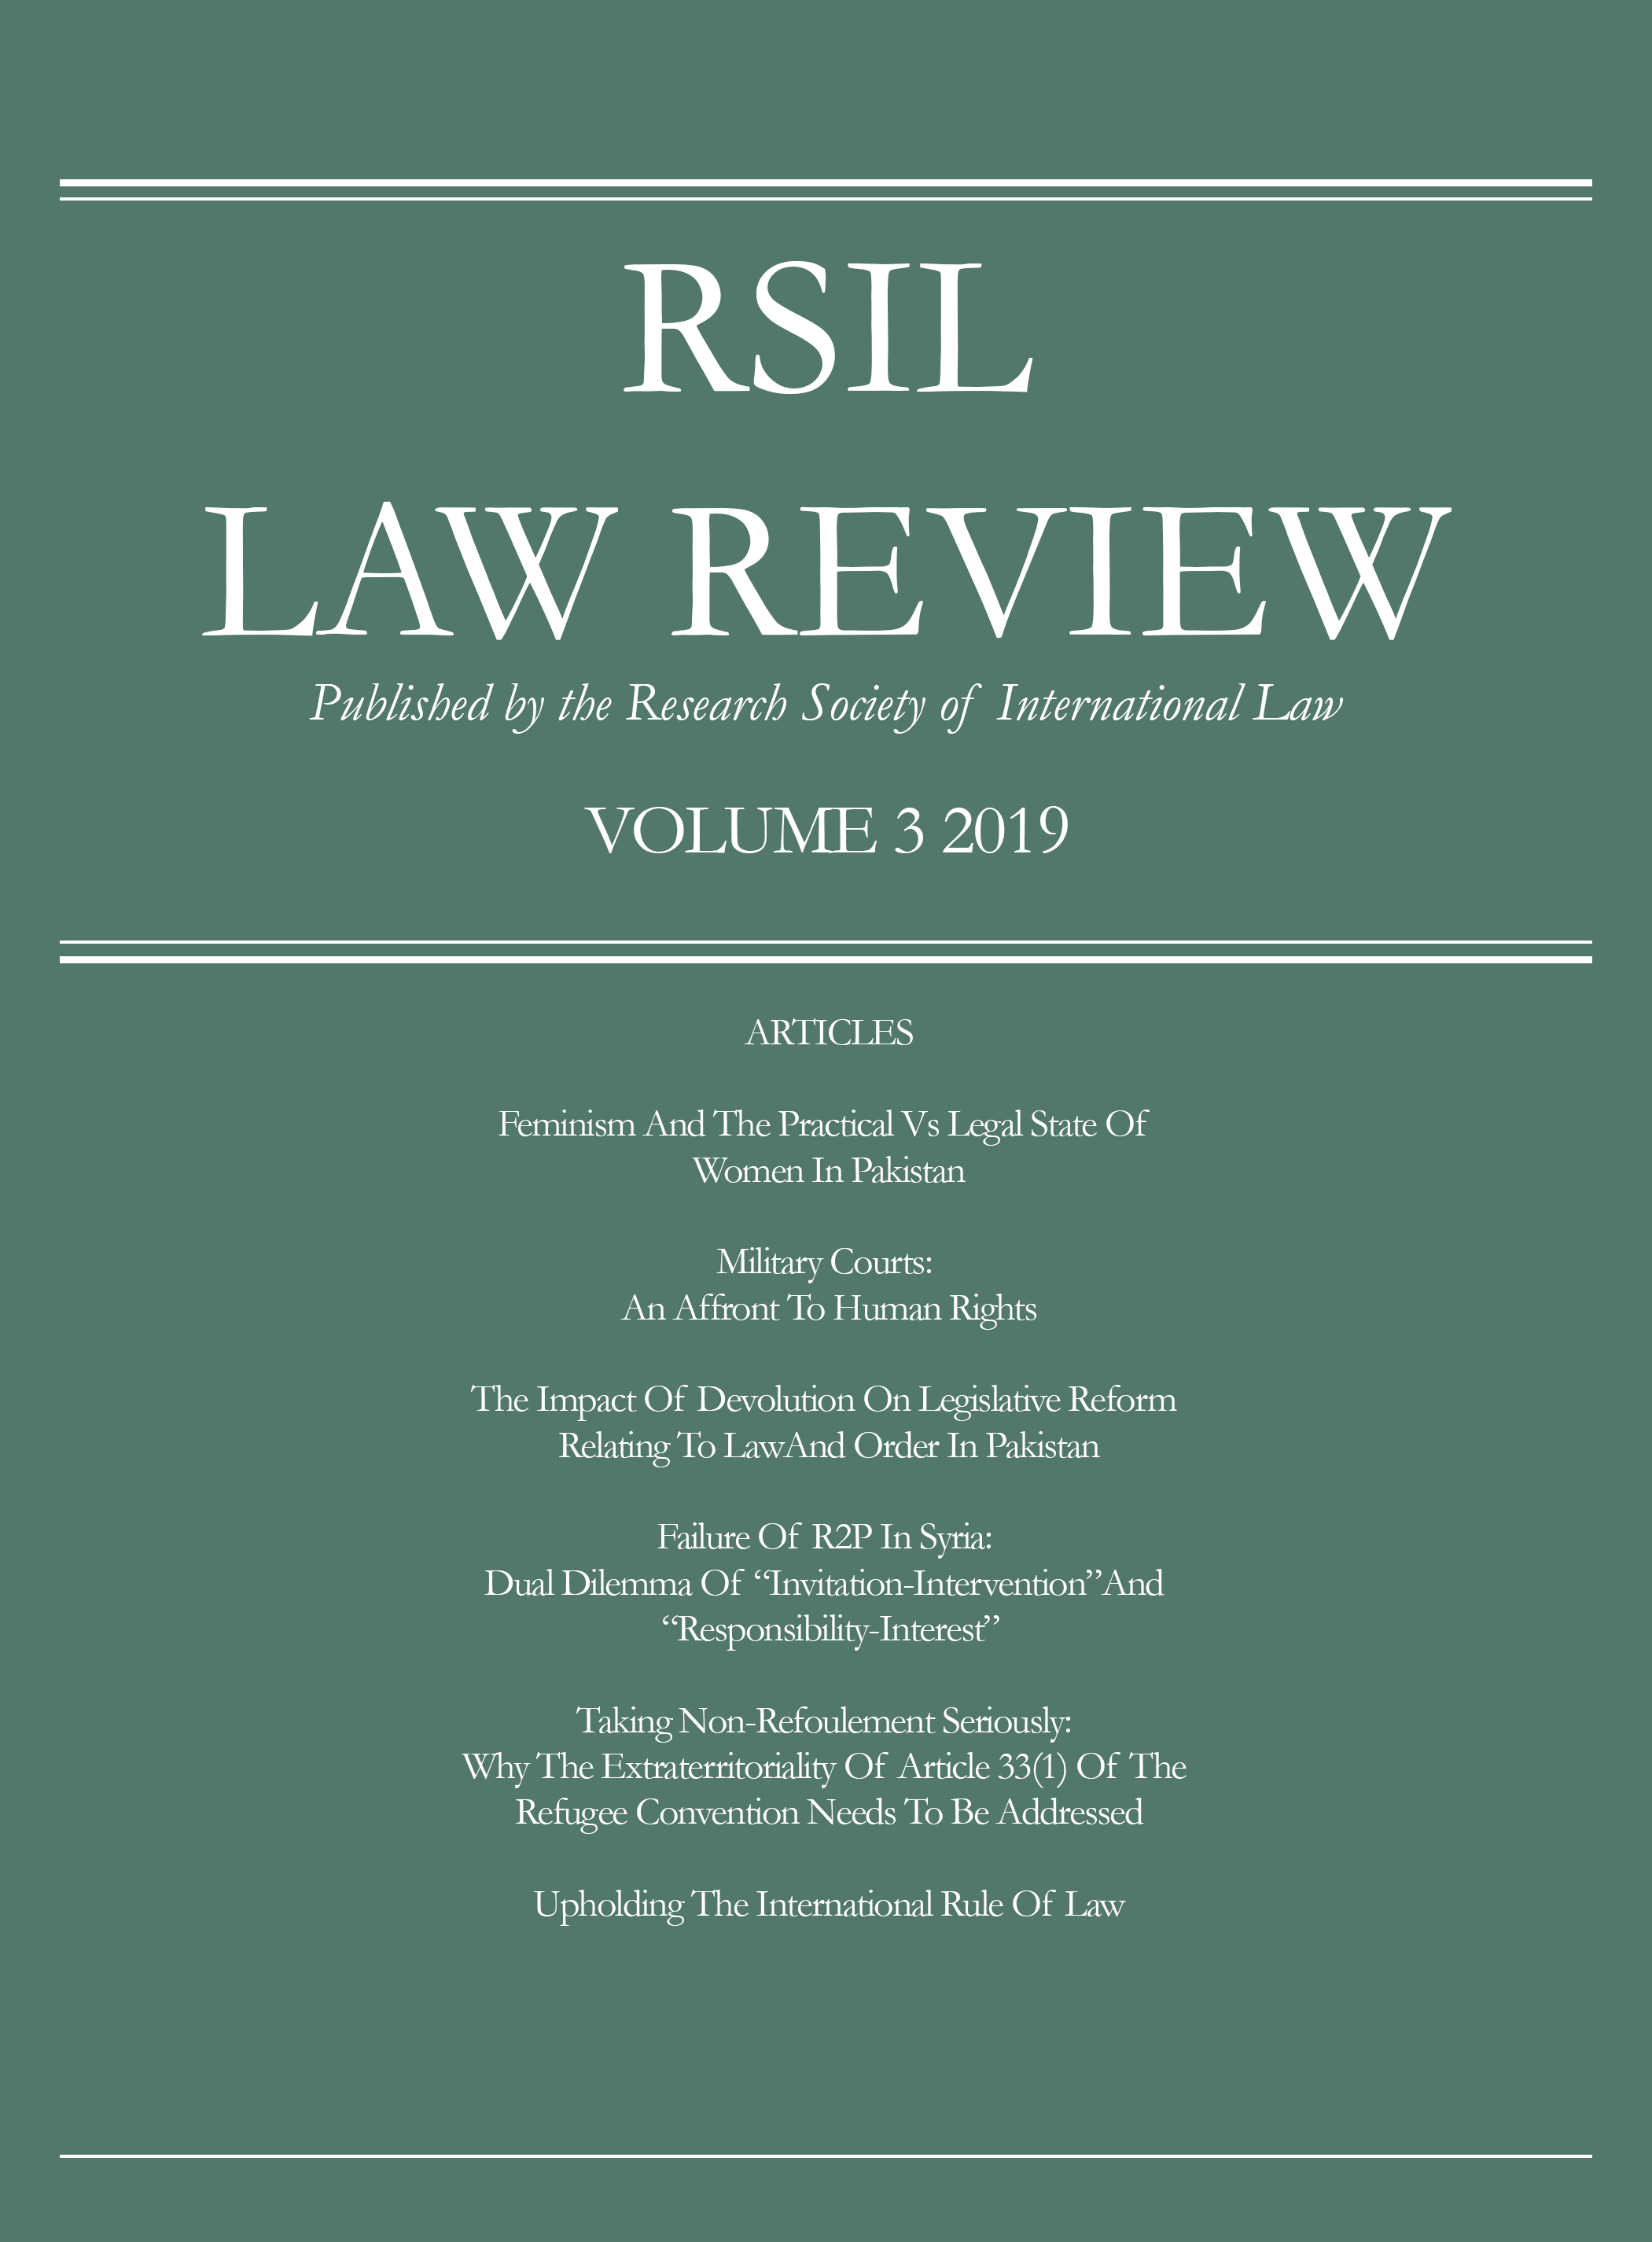 RSIL Law Review Vol. 3 2019